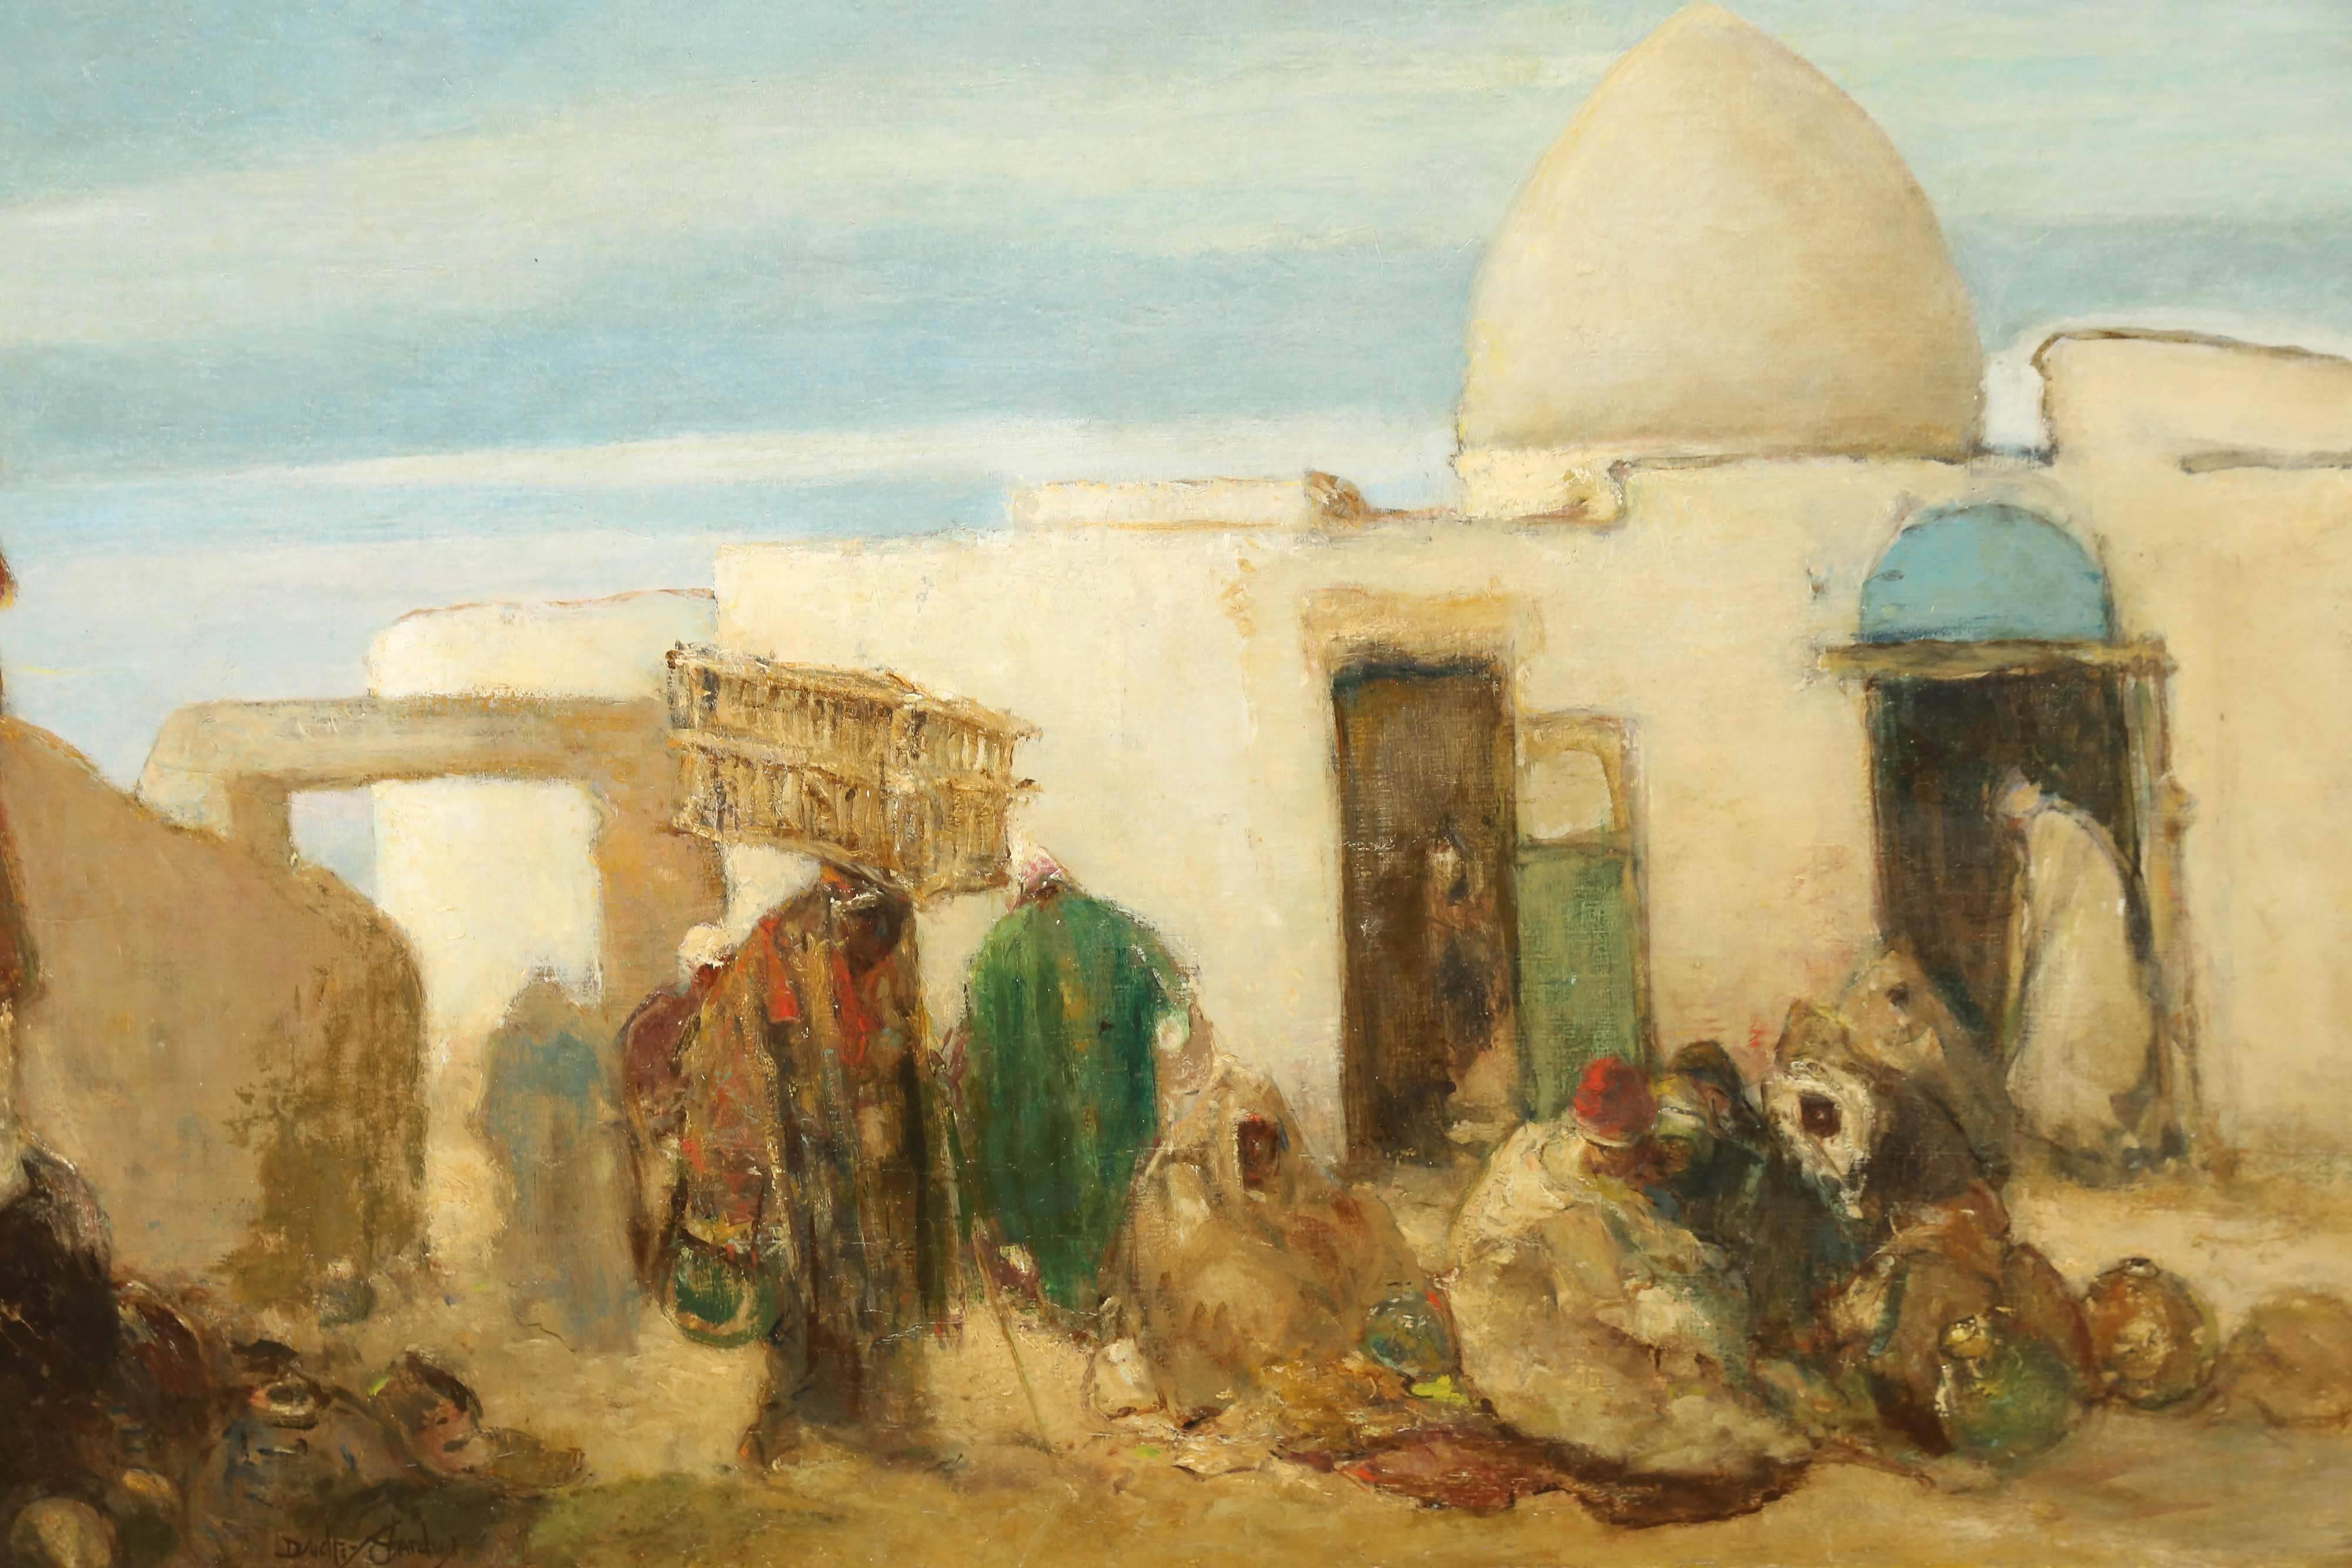 British Orientalist.
Hardy was the eldest son of the marine painter Thomas Bush Hardy, under whose influence and tutelage he first learned to draw and paint. In 1882 he attended the Düsseldorf Academy where he remained for three years. After a